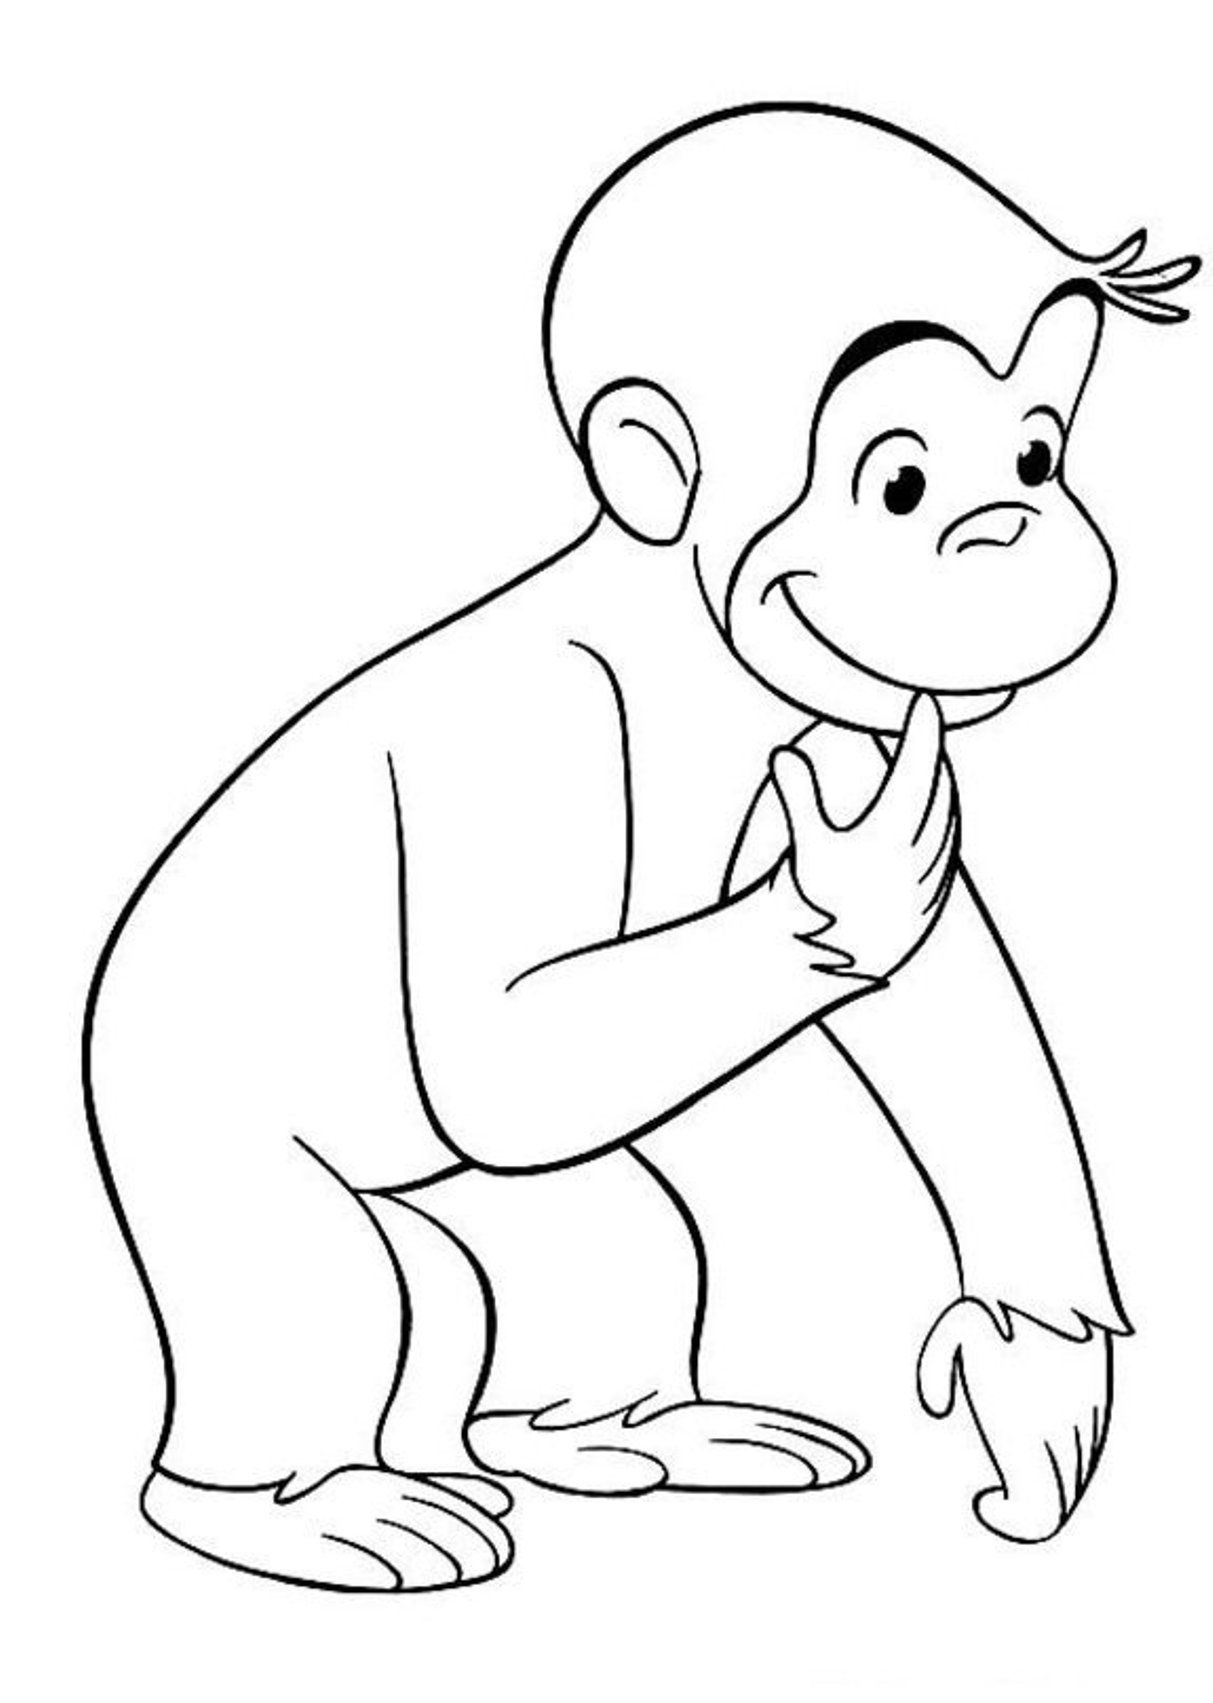 curious-george-coloring-page-0003-q1